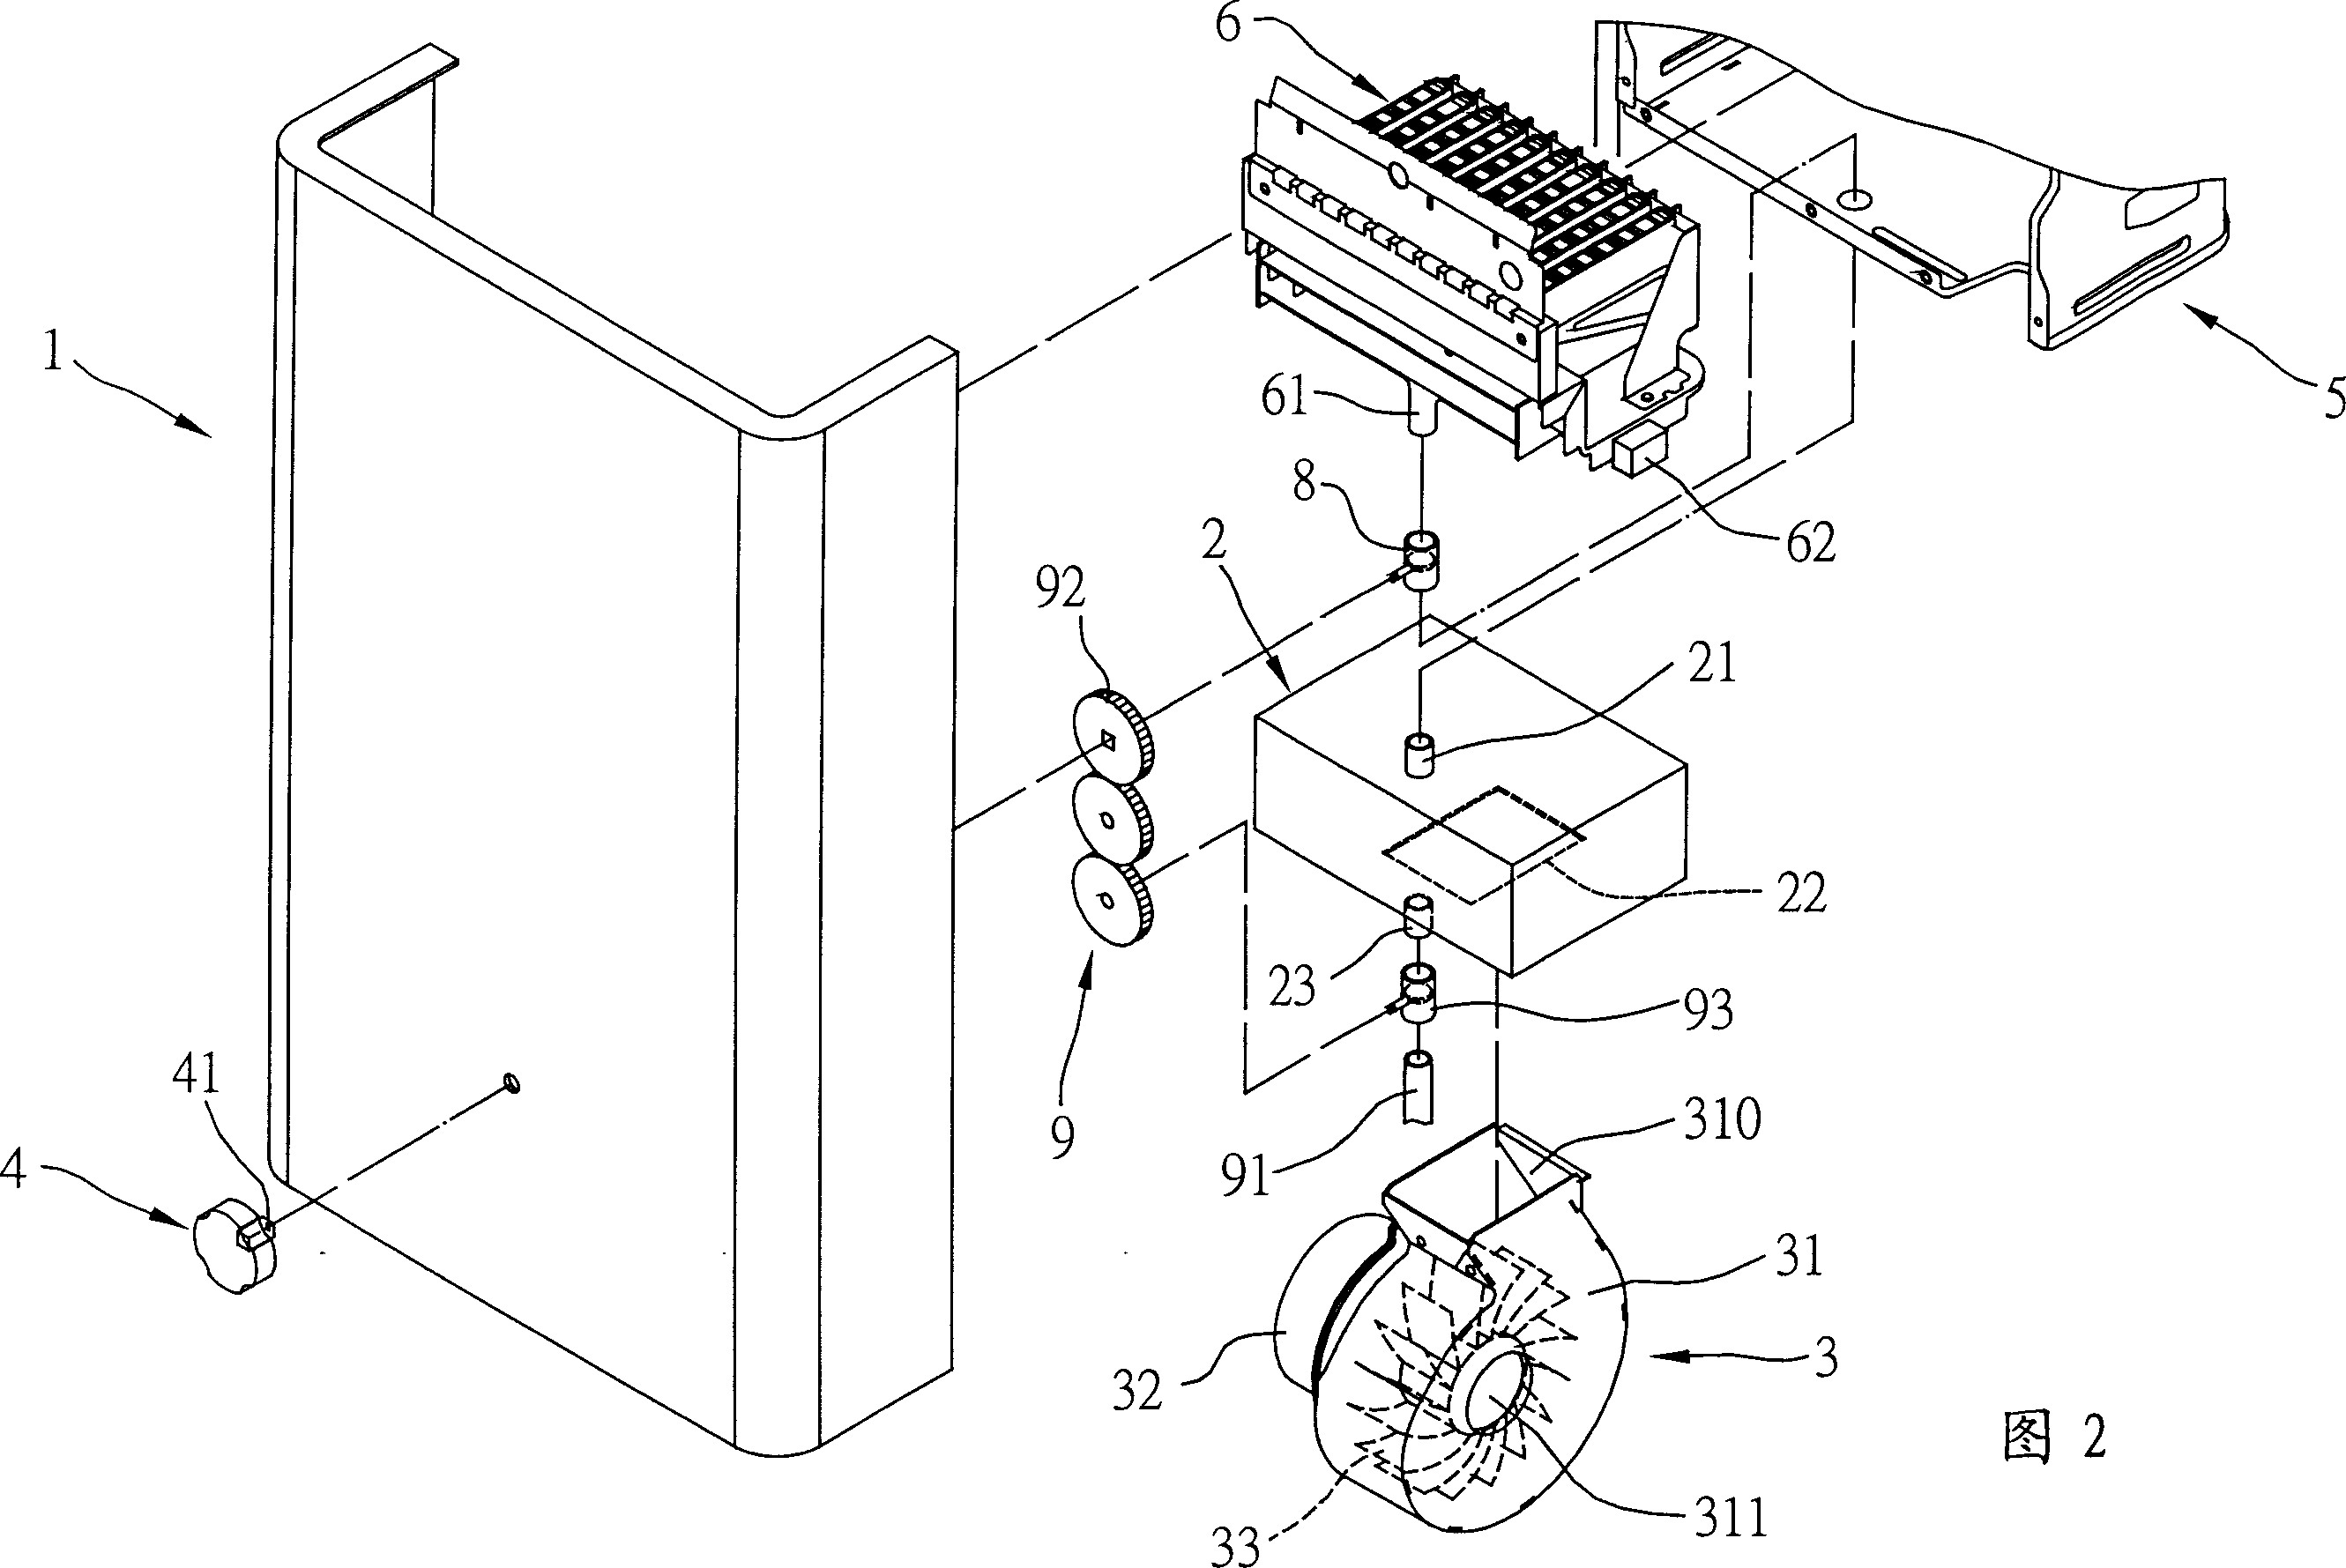 Water heater with interlinked air intake regulator and its operation process